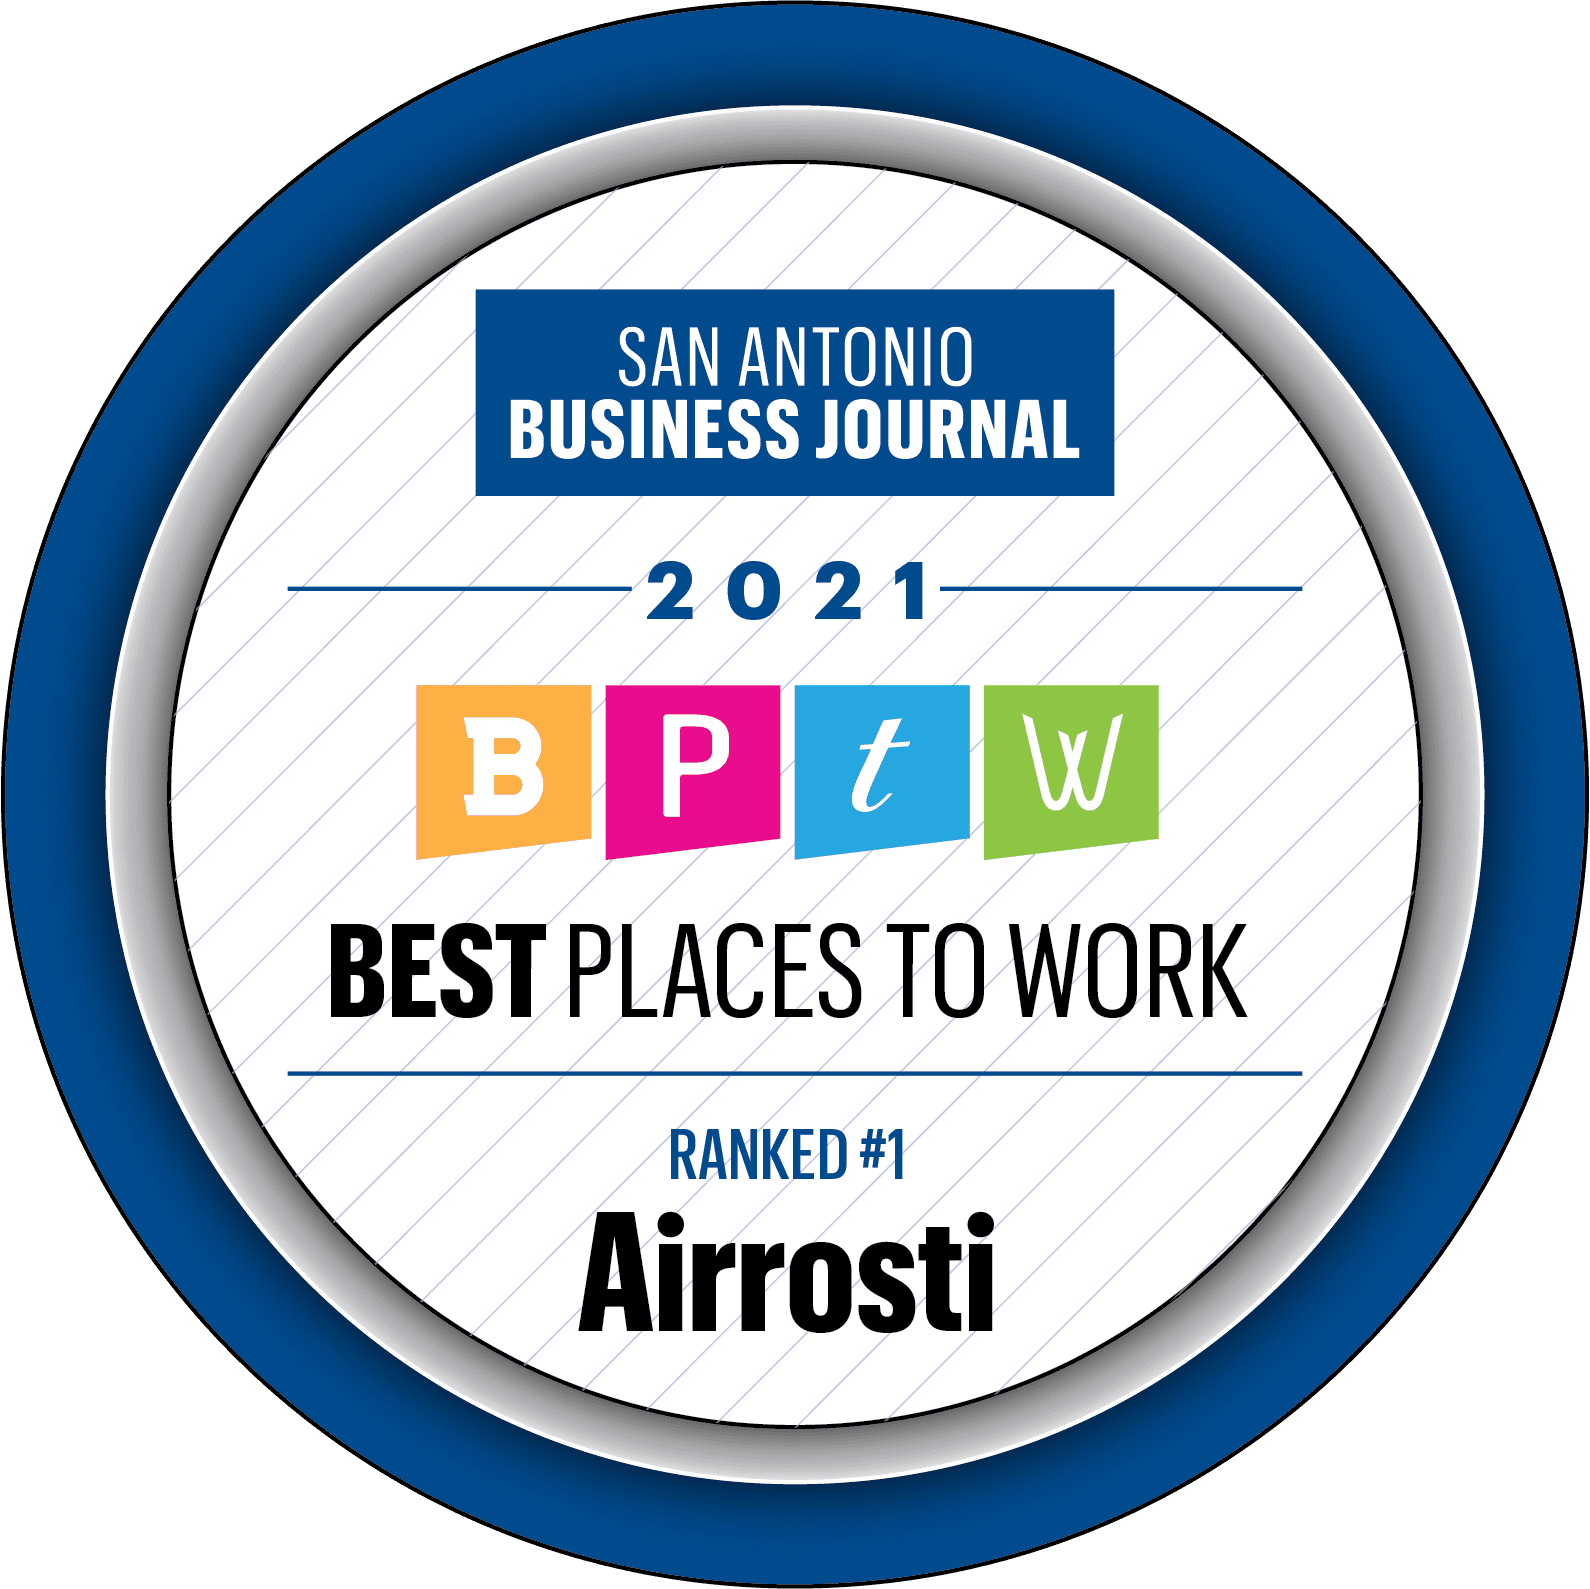 Best Places to Work #1